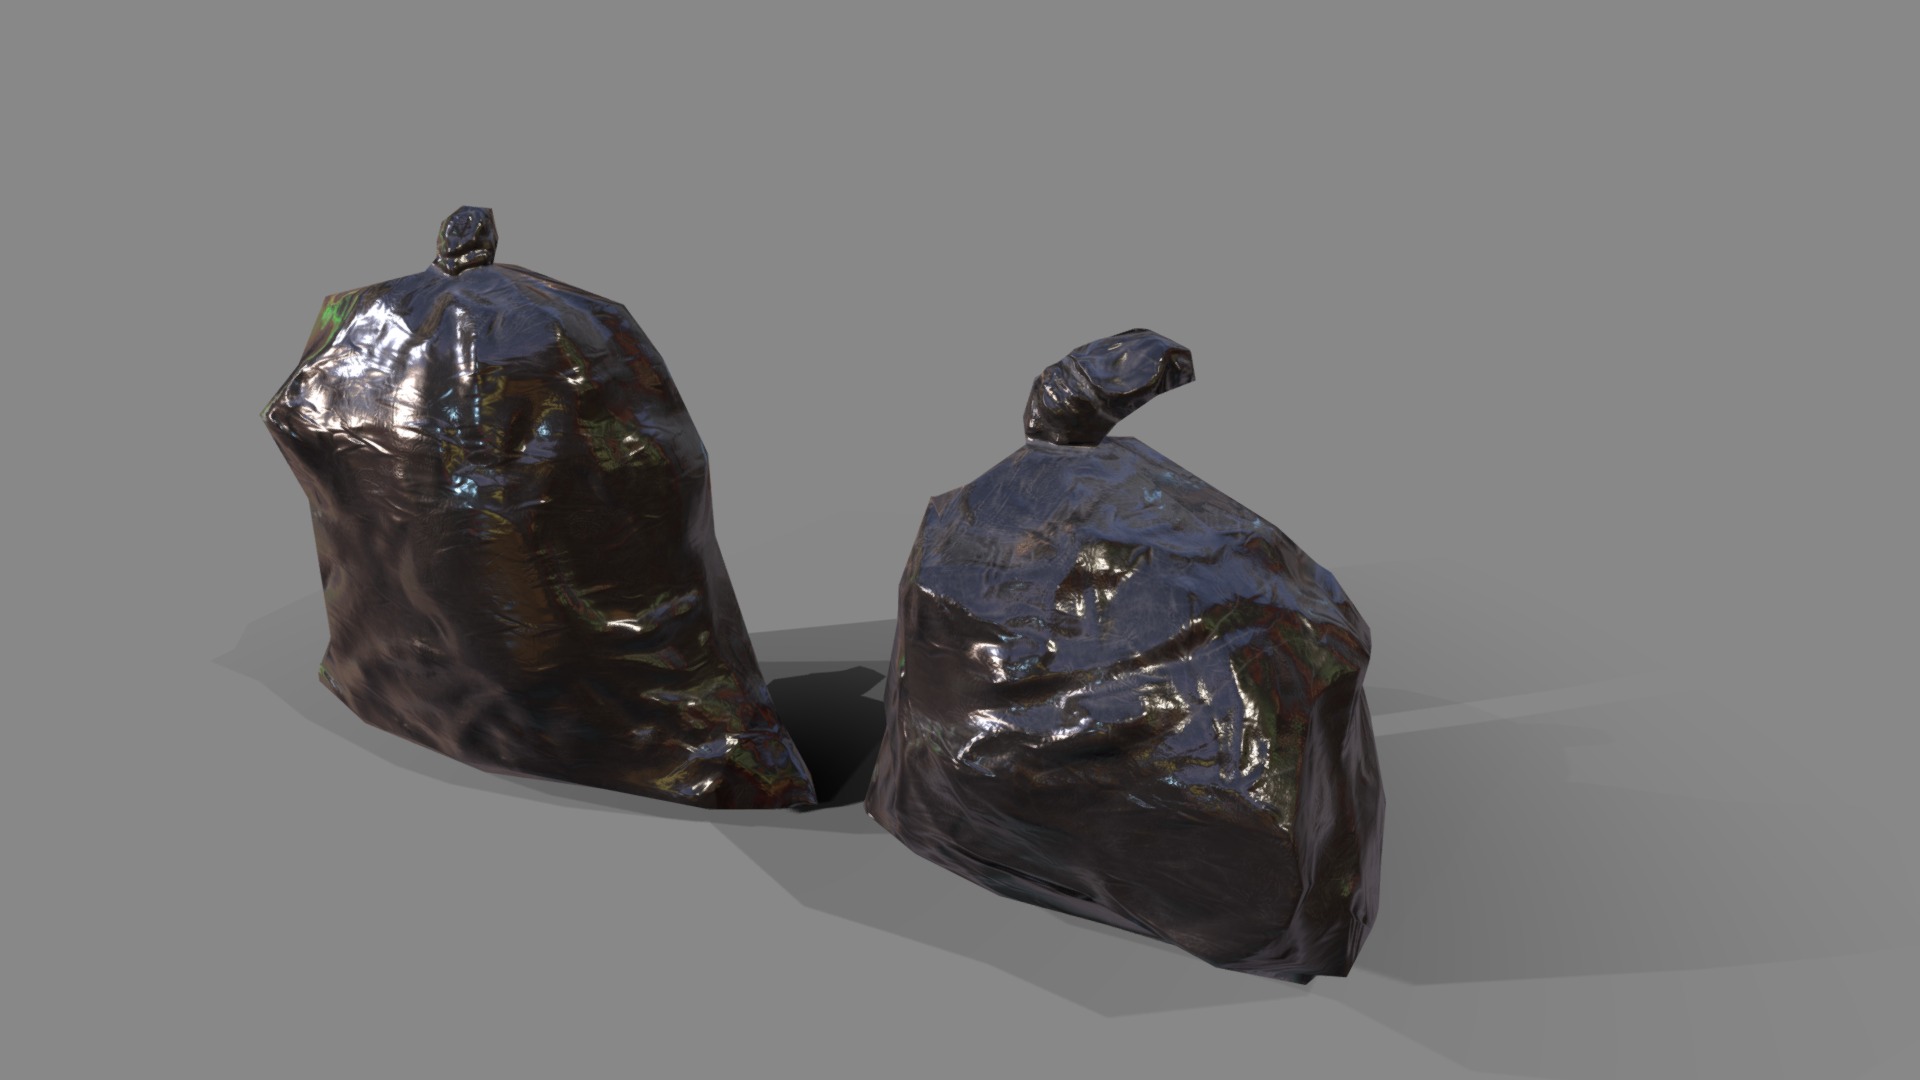 3D model Binbag2 - This is a 3D model of the Binbag2. The 3D model is about a couple of clear glass vases.